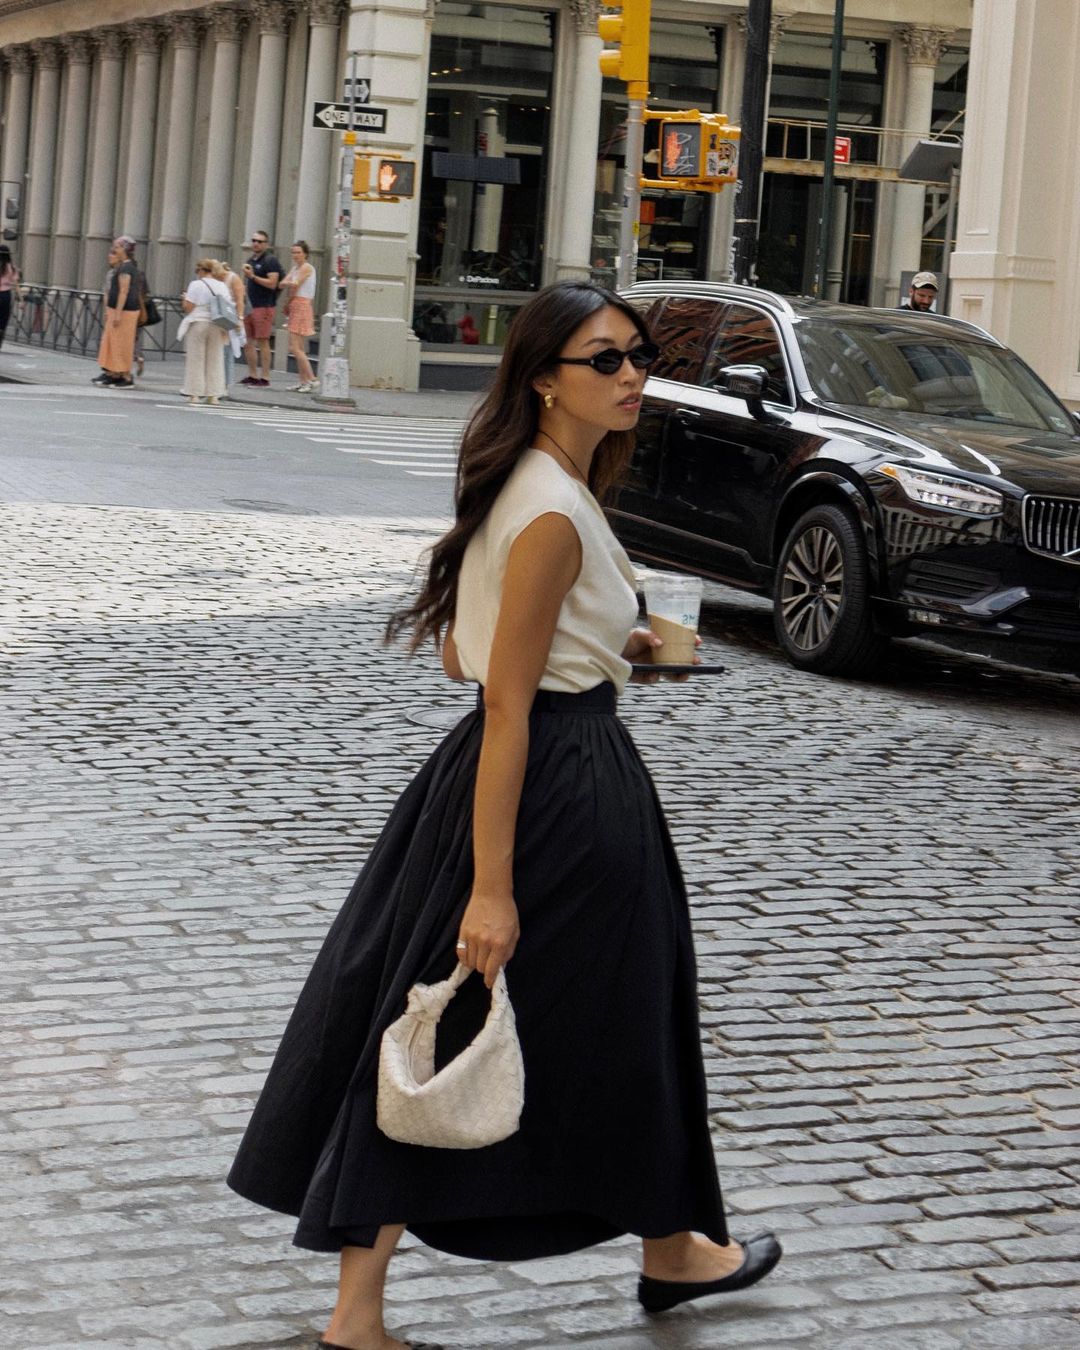 Cotton Skirt Trend: @michellelin.lin wears a black cotton skirt with a cream top whilst walking across a cobble street